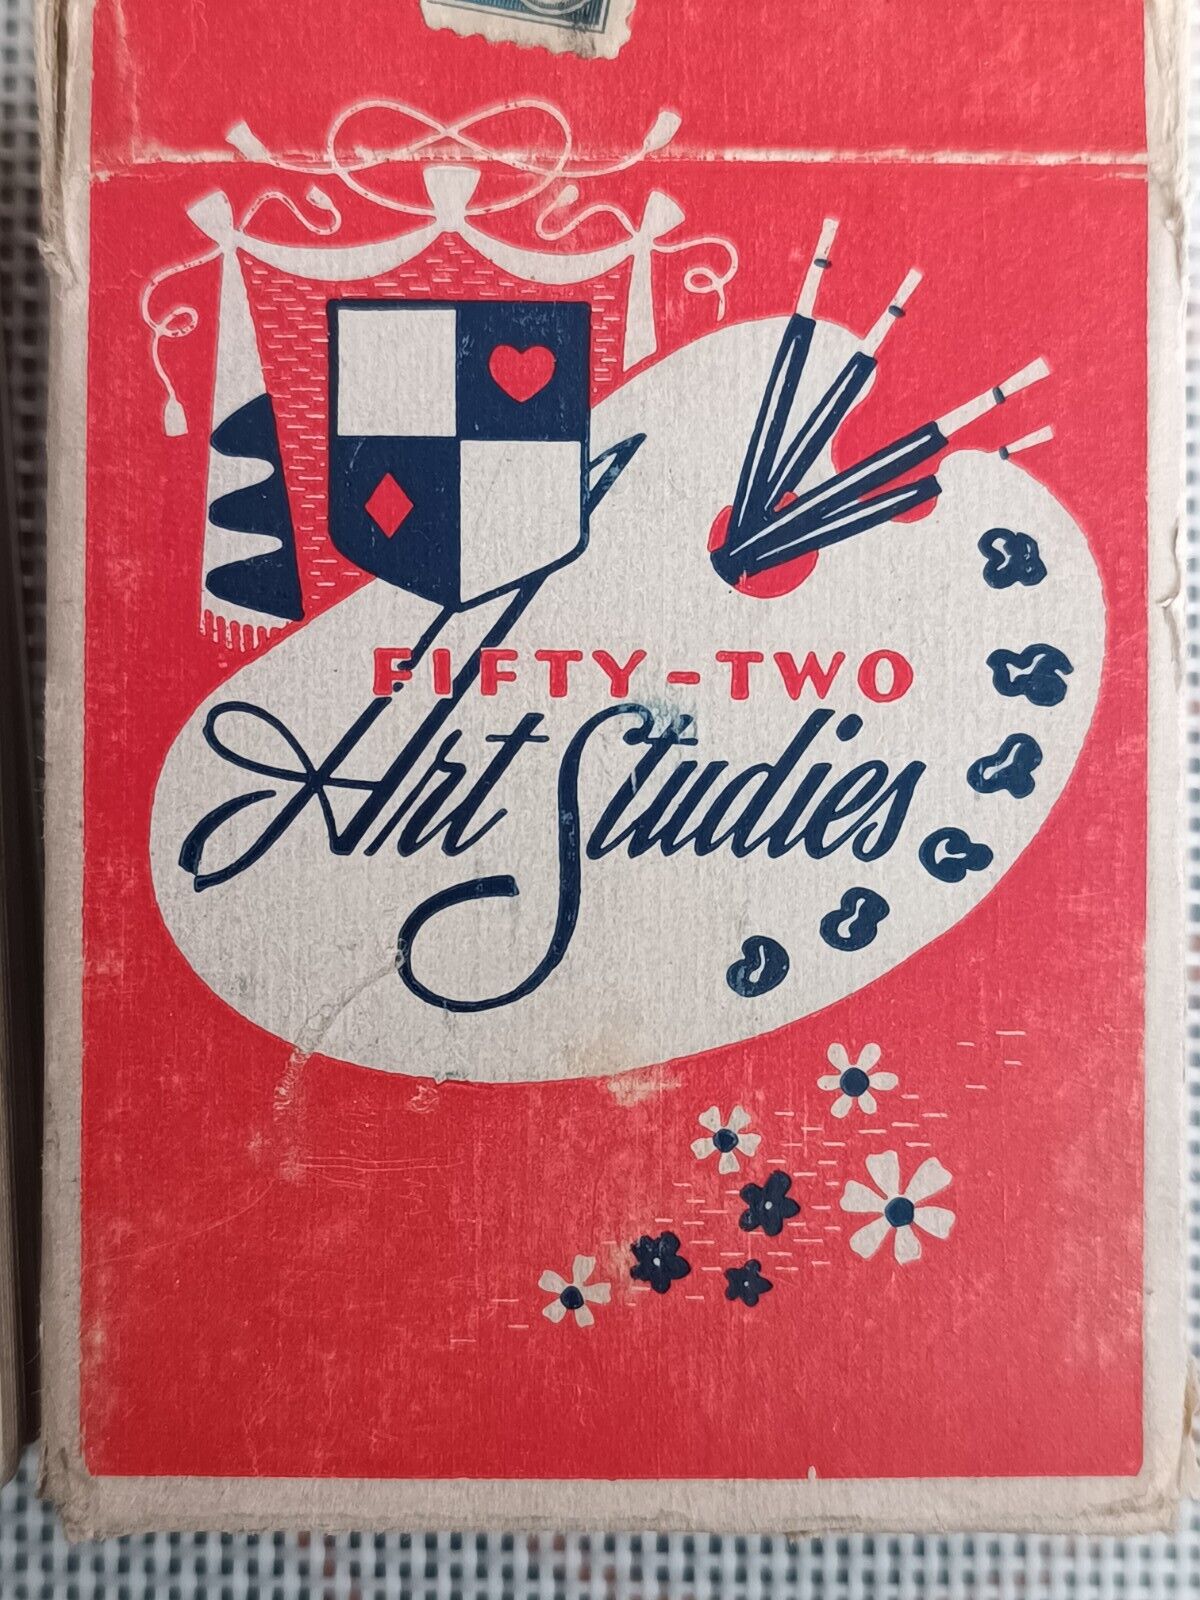 Vintage Fifty-Two 